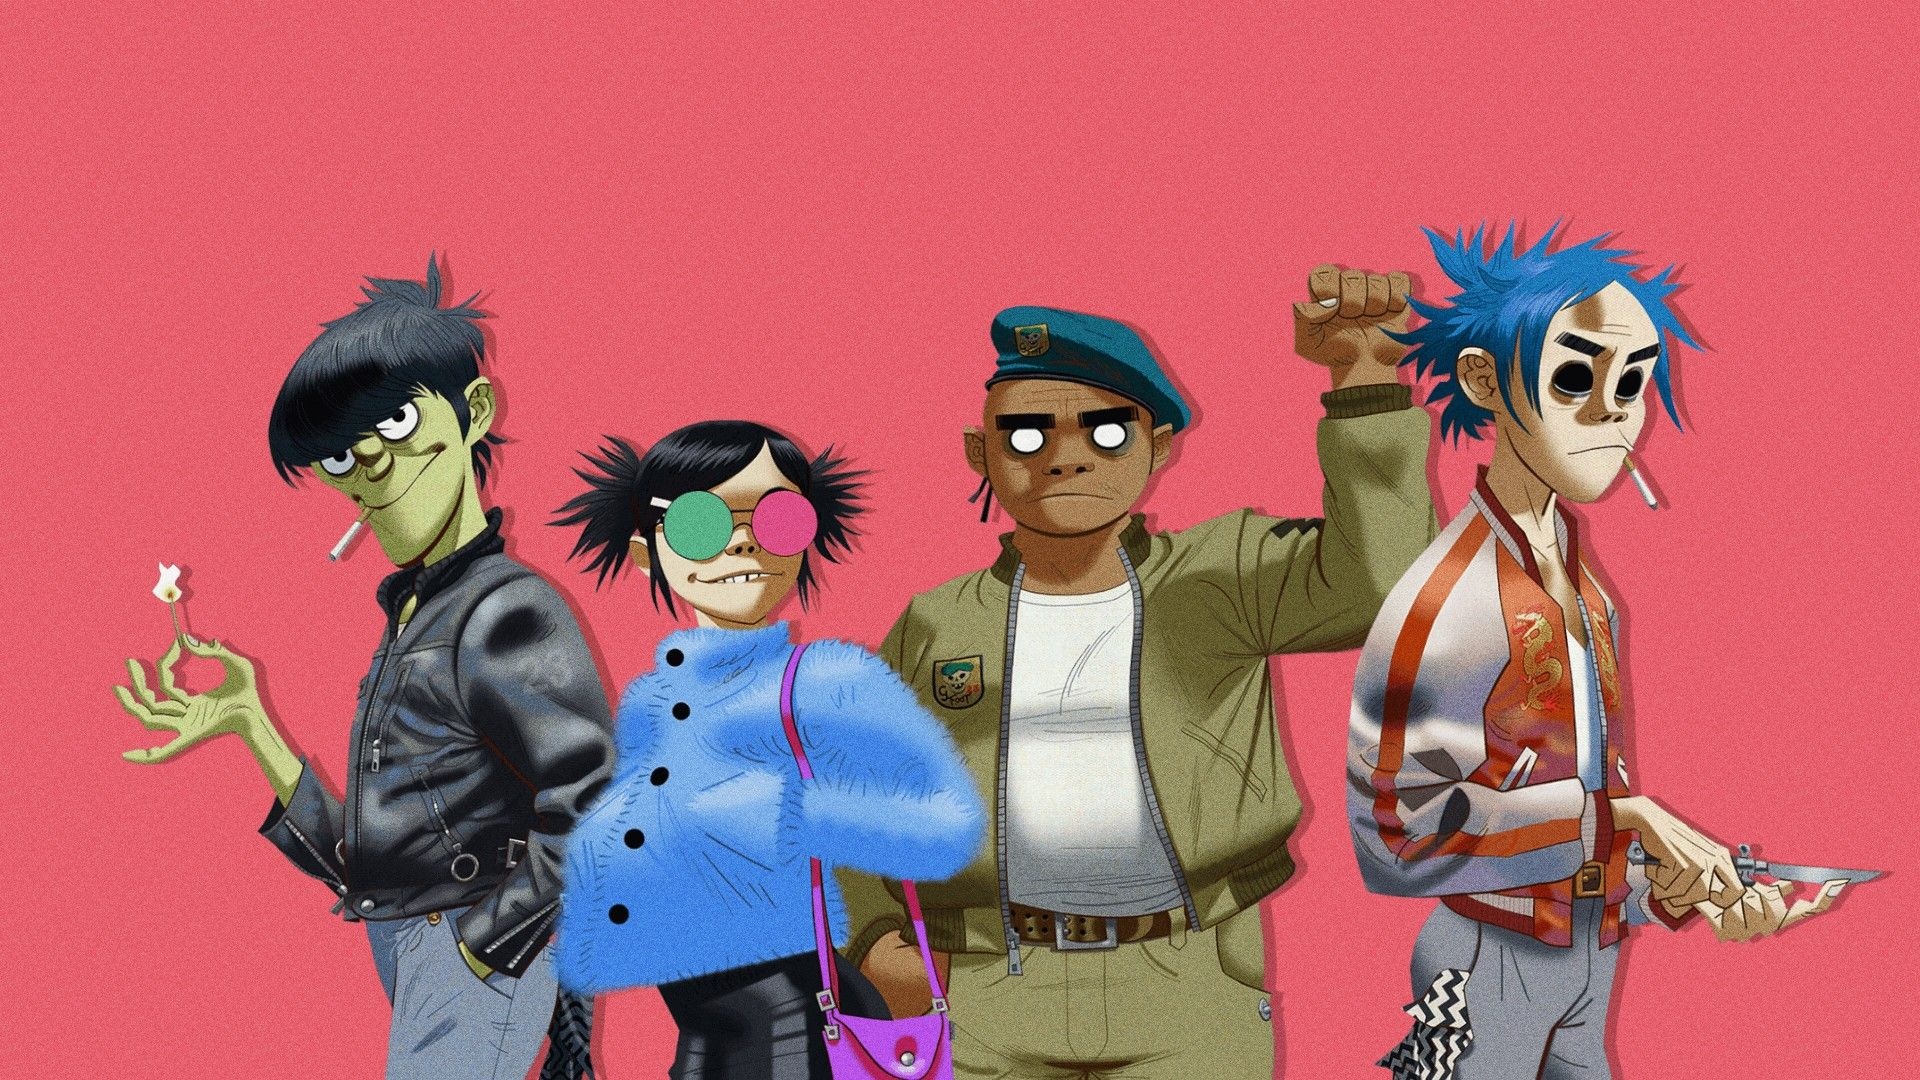 Gorillaz: The veteran band, The first self-titled record released in 2001, An instant hit. 1920x1080 Full HD Wallpaper.